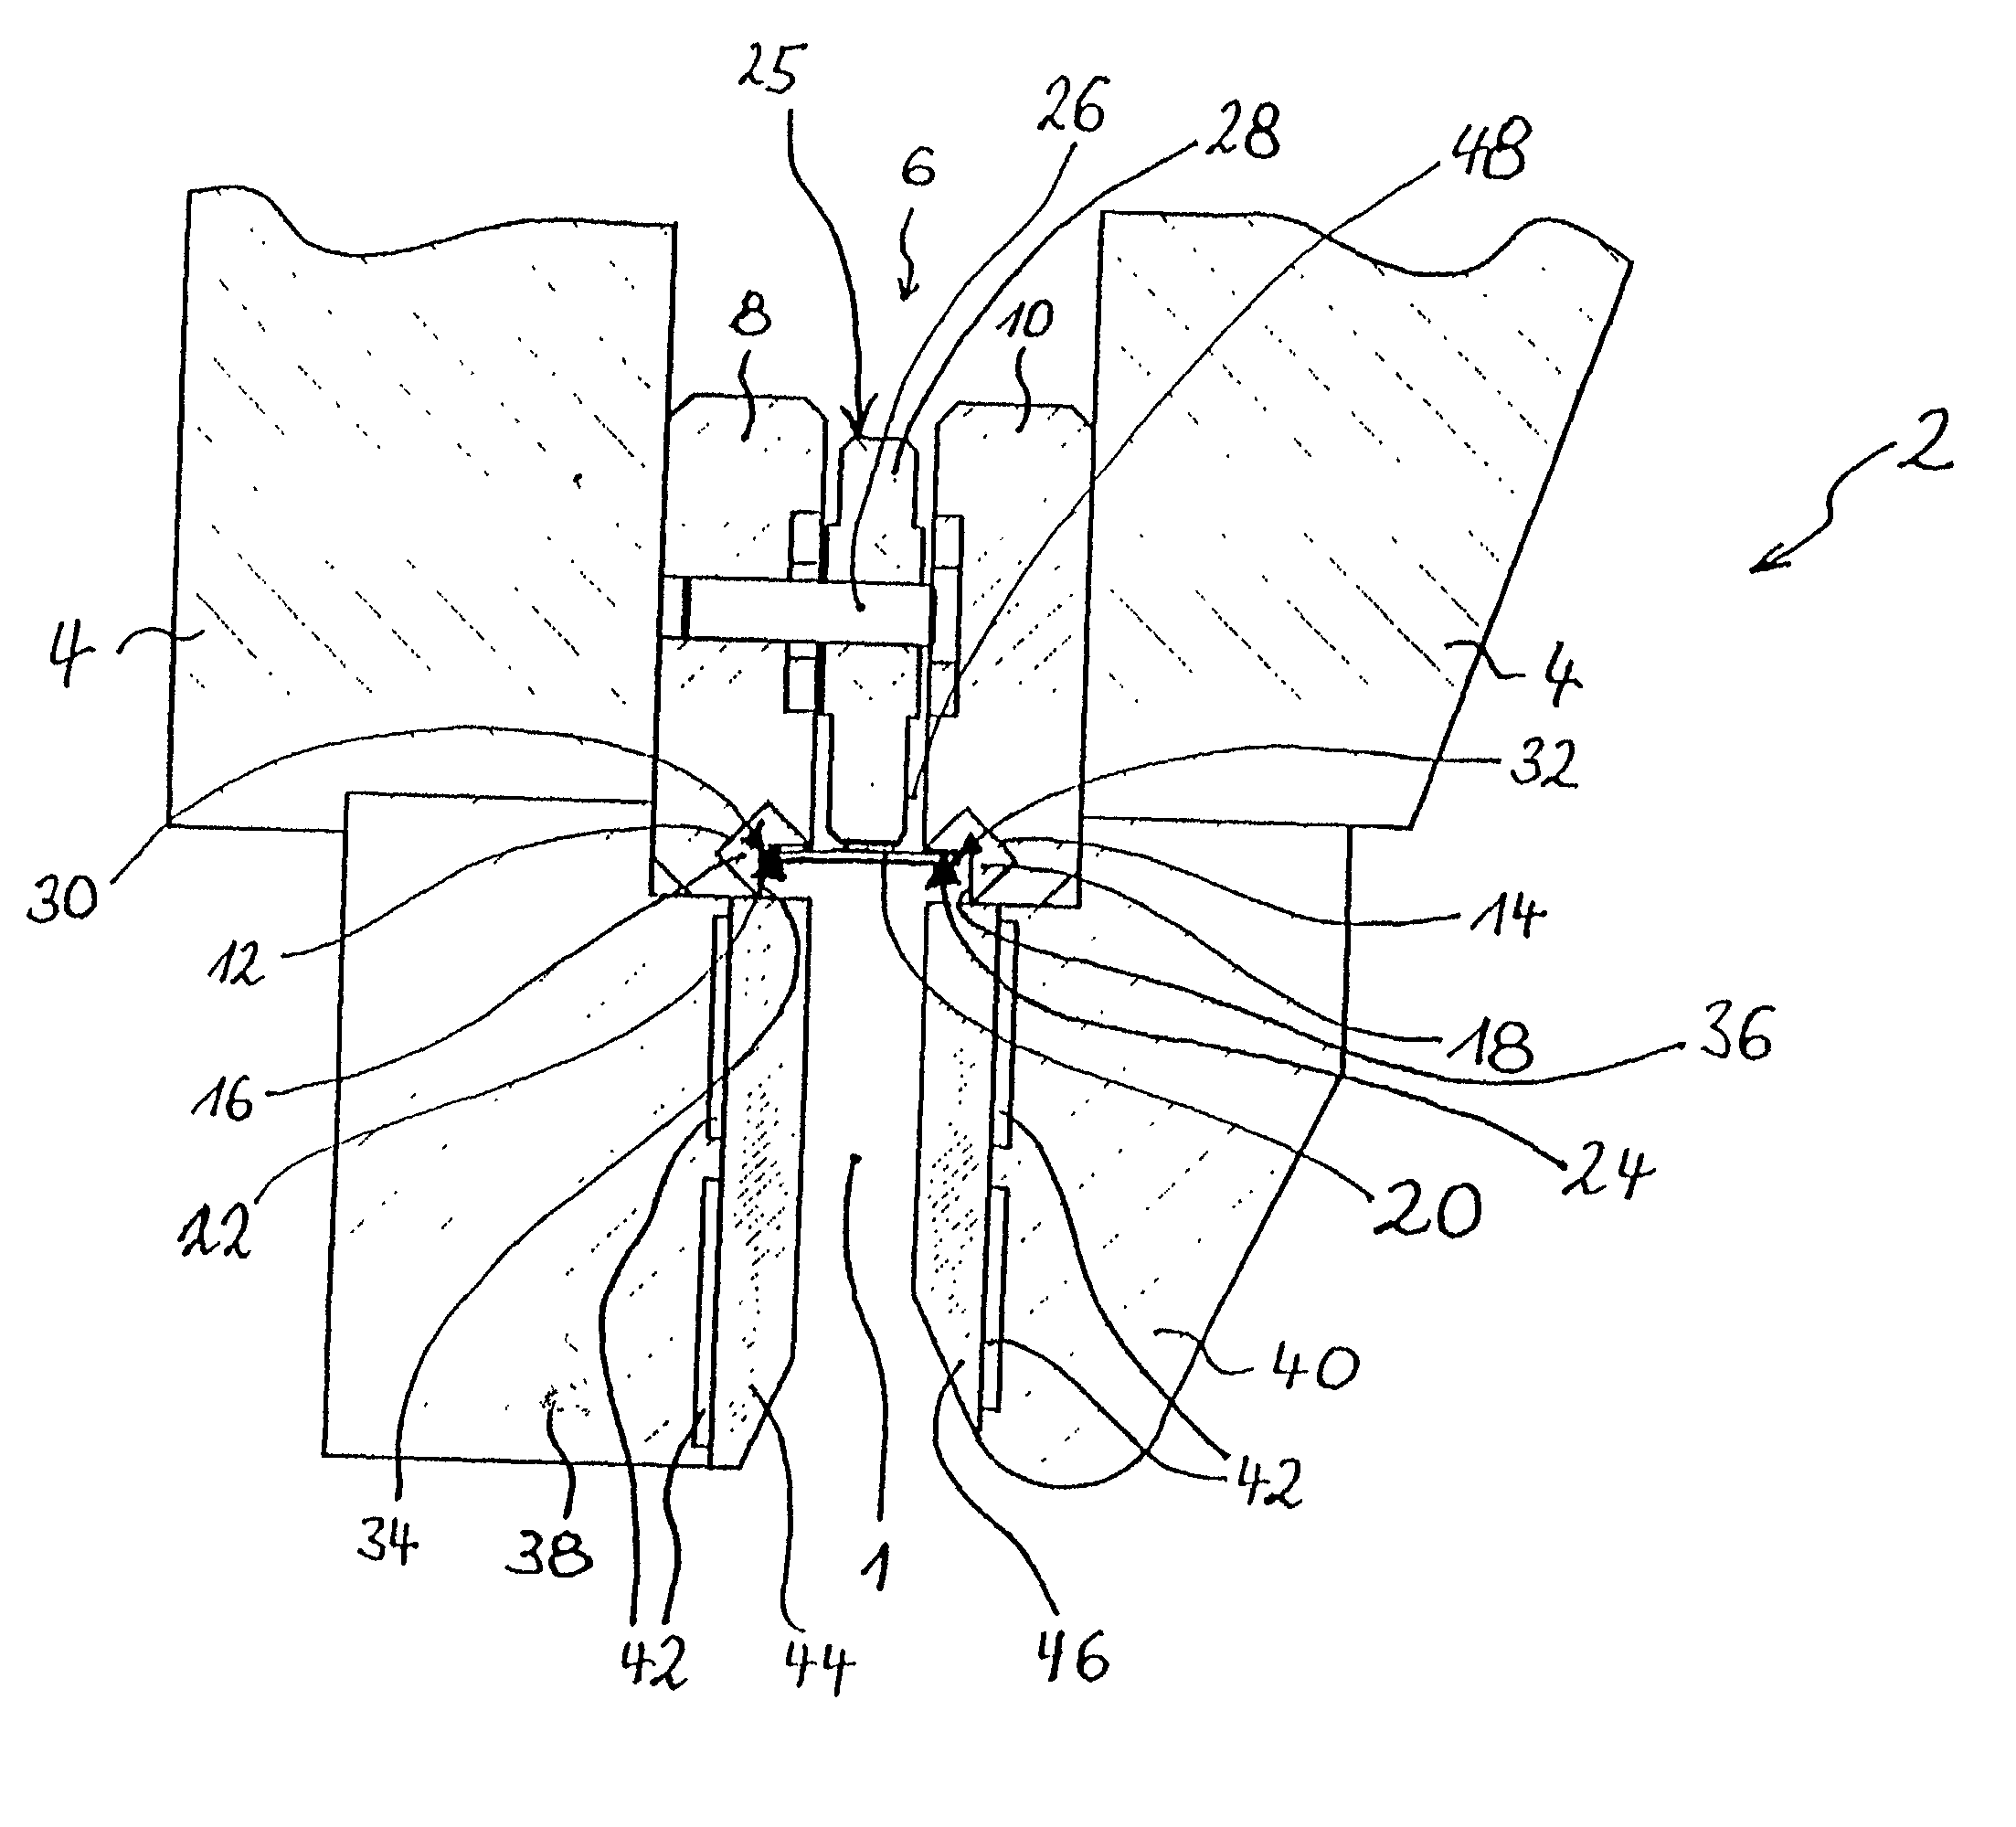 Apparatus for advancing streams of particles of smokable material